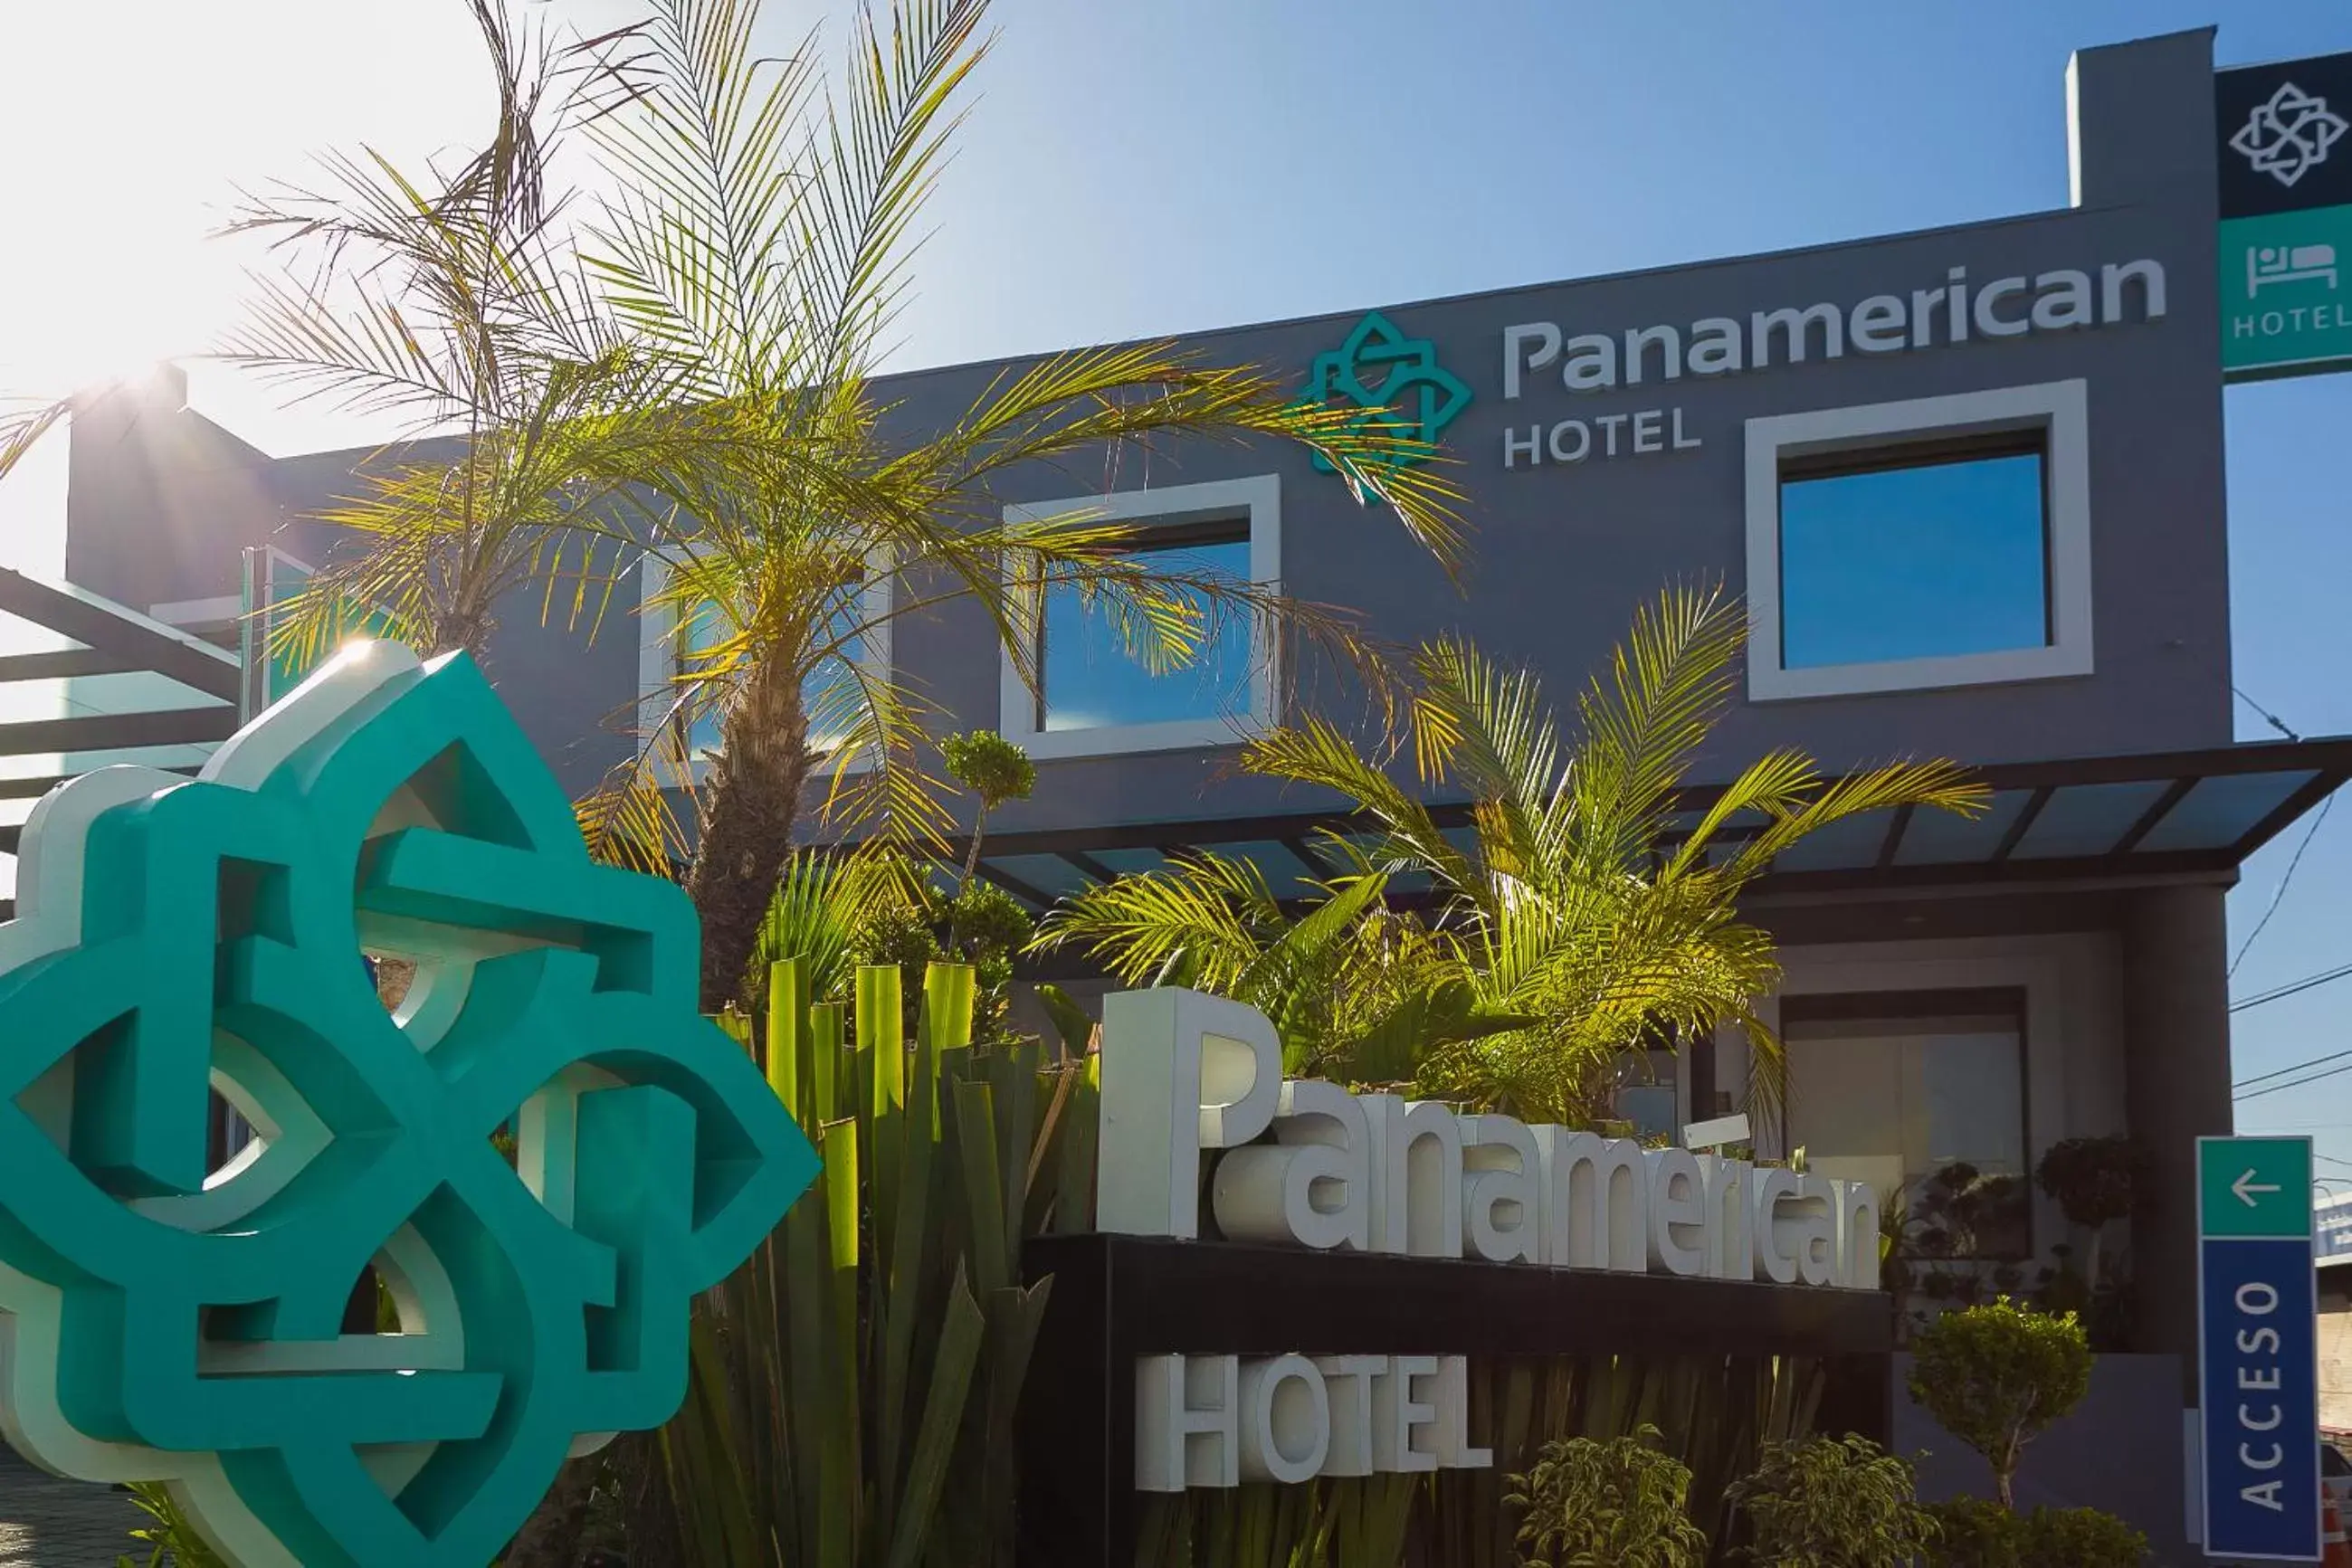 Property Logo/Sign in Hotel Panamerican